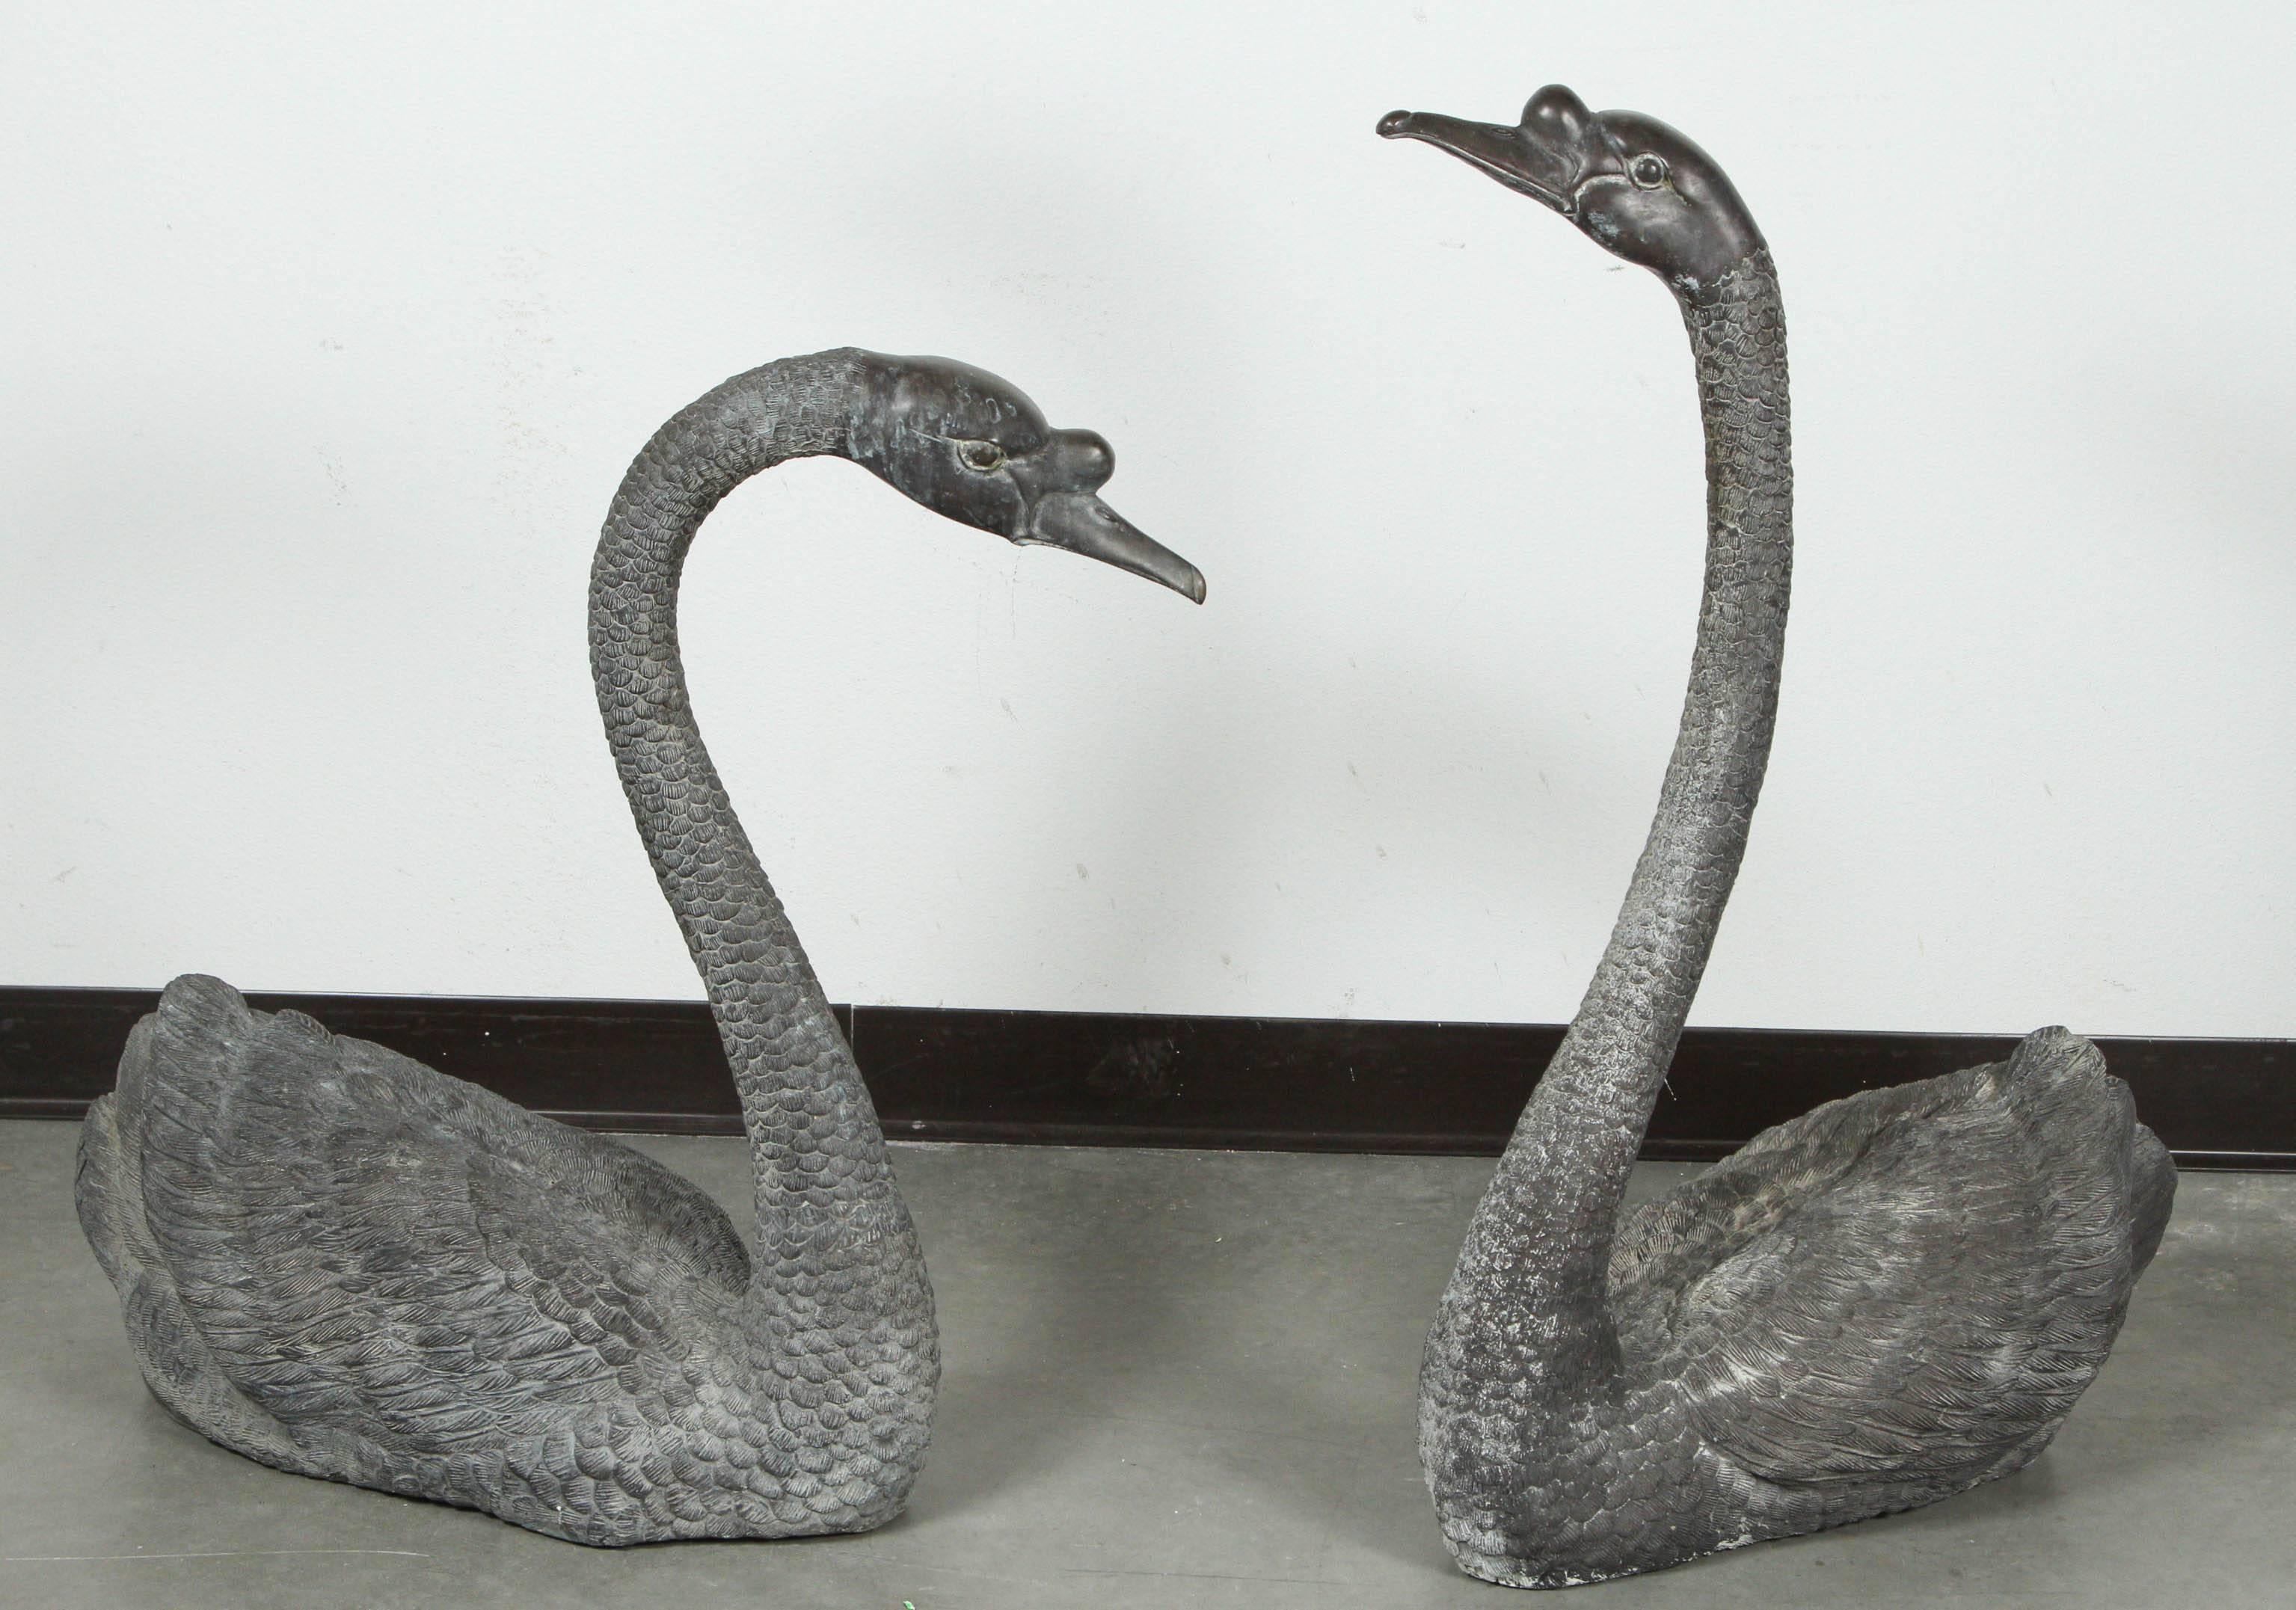 Gorgeous pair of lifesize swans cast in bronze. Their poses are different and complimentary. They are finished with great attention to the realistic detailing of the feathers and have a lovely patina from the elements.